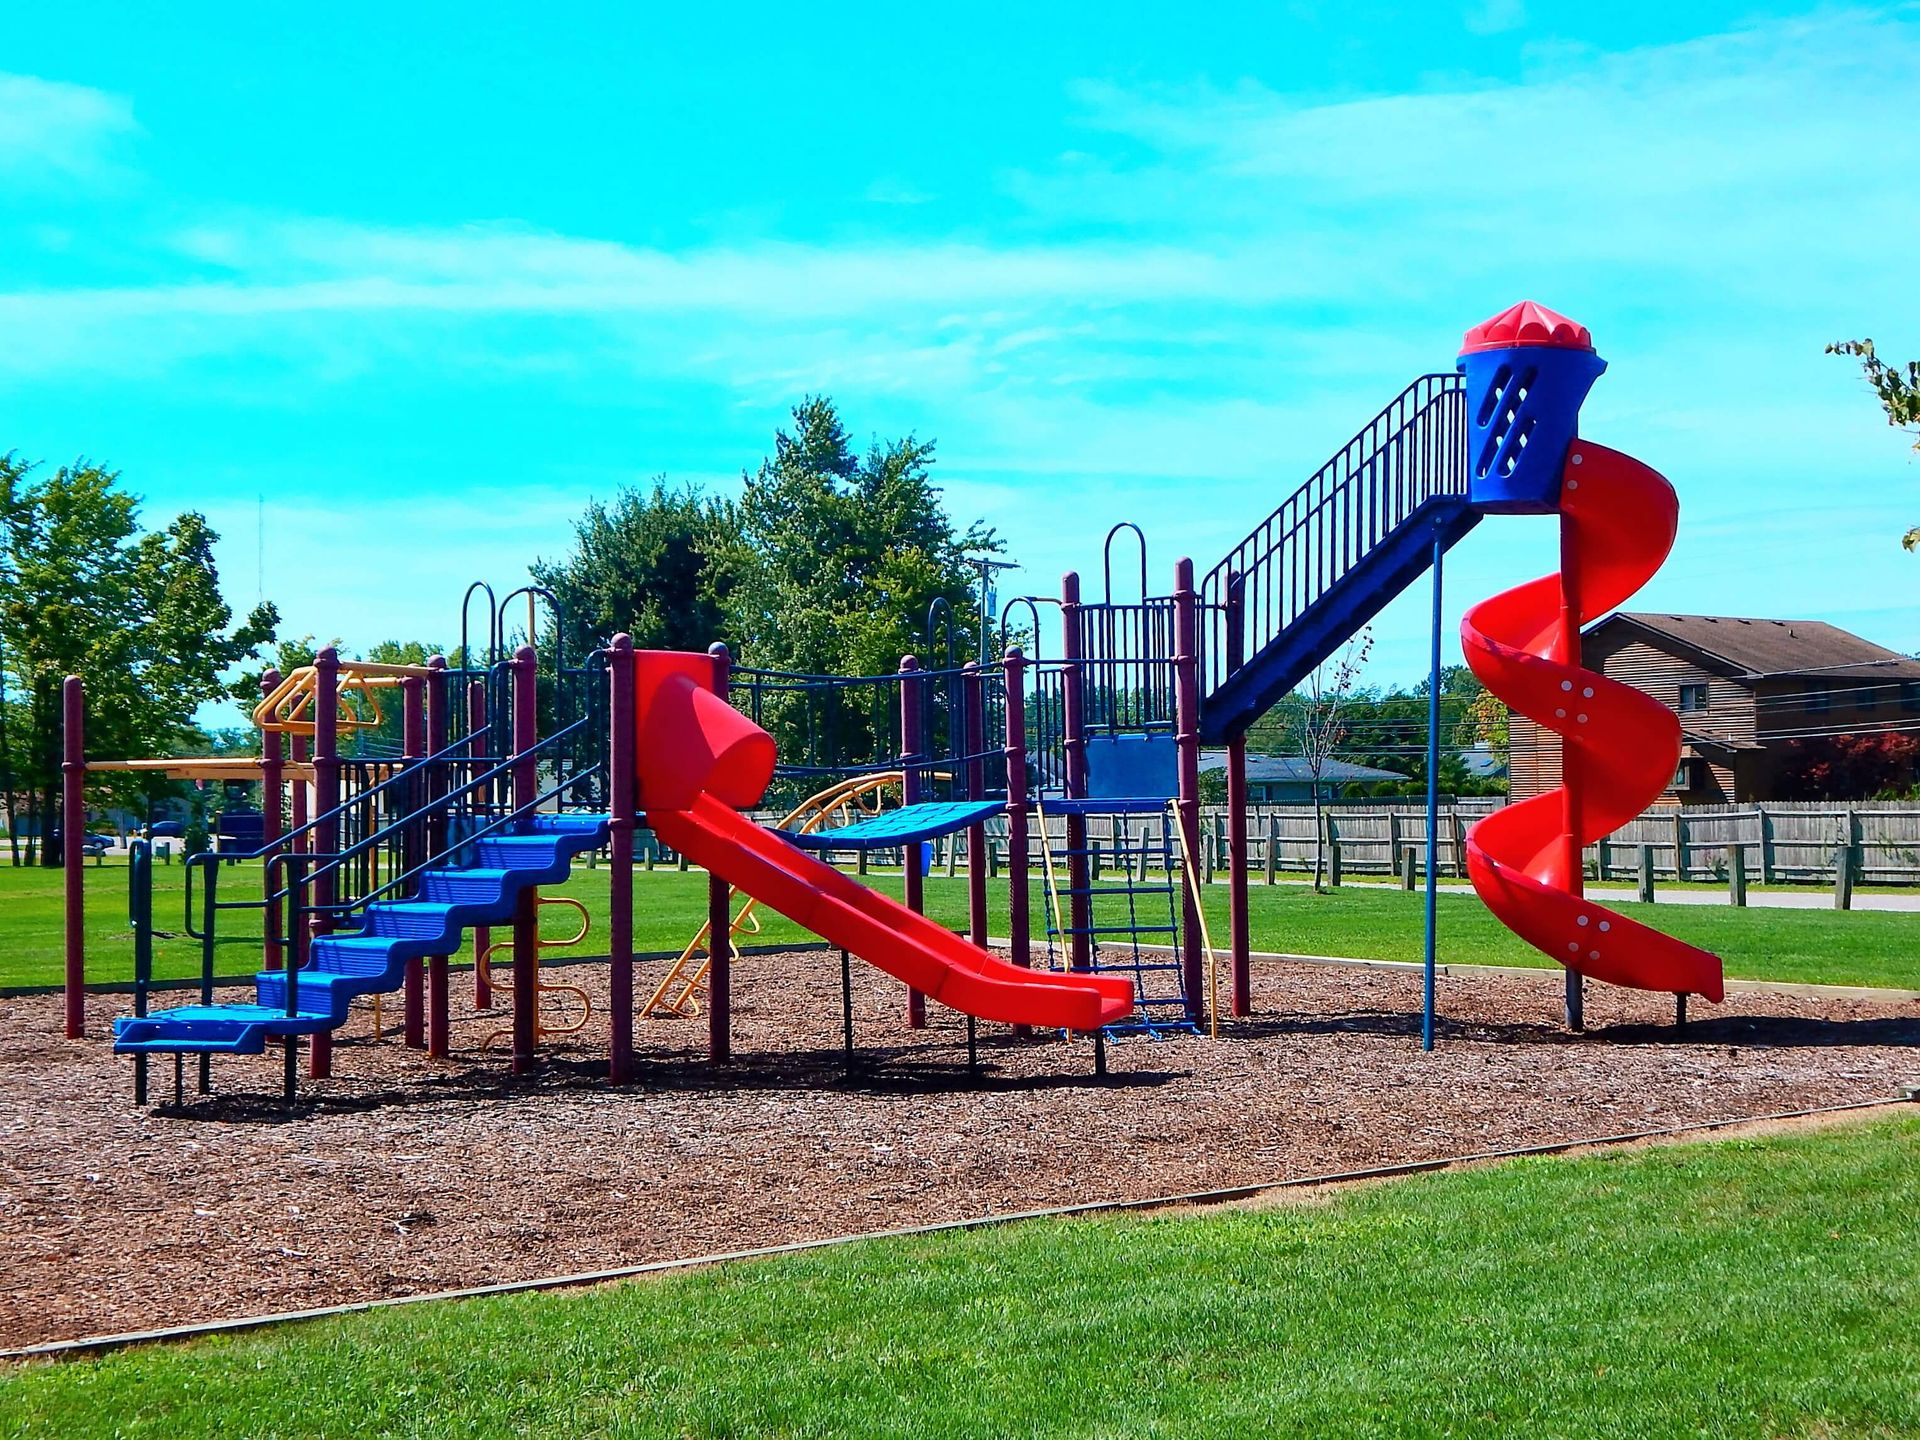 A playground with a red and blue slide and stairs.